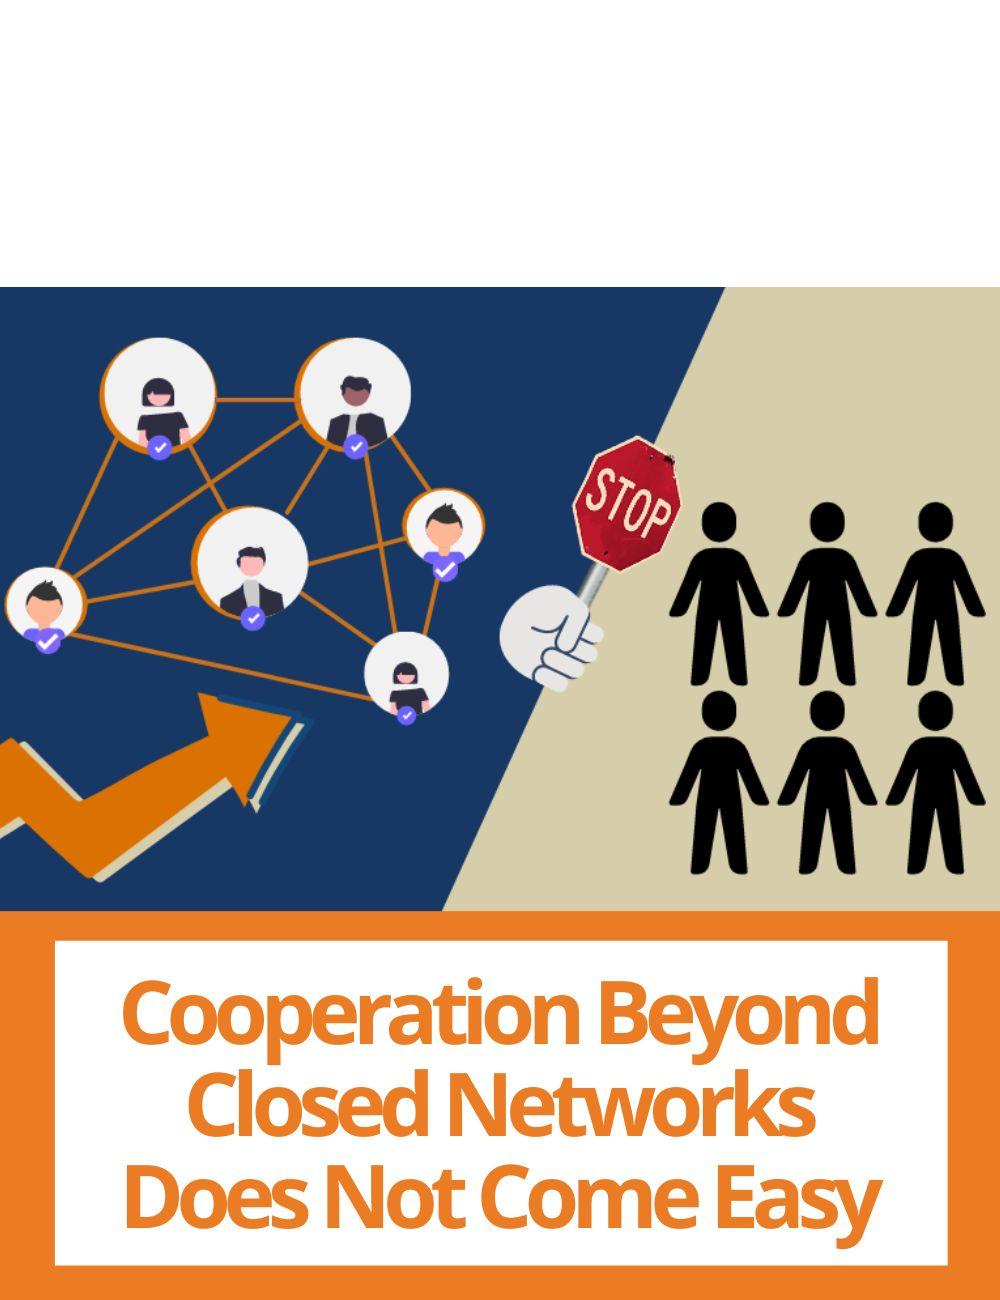 Link to related stories. The illustration of a closed network shows that business leaders may be wary of people outside their network. Story headline: Cooperation Beyond Closed Networks Does Not Come Easy to Successful Businessmen